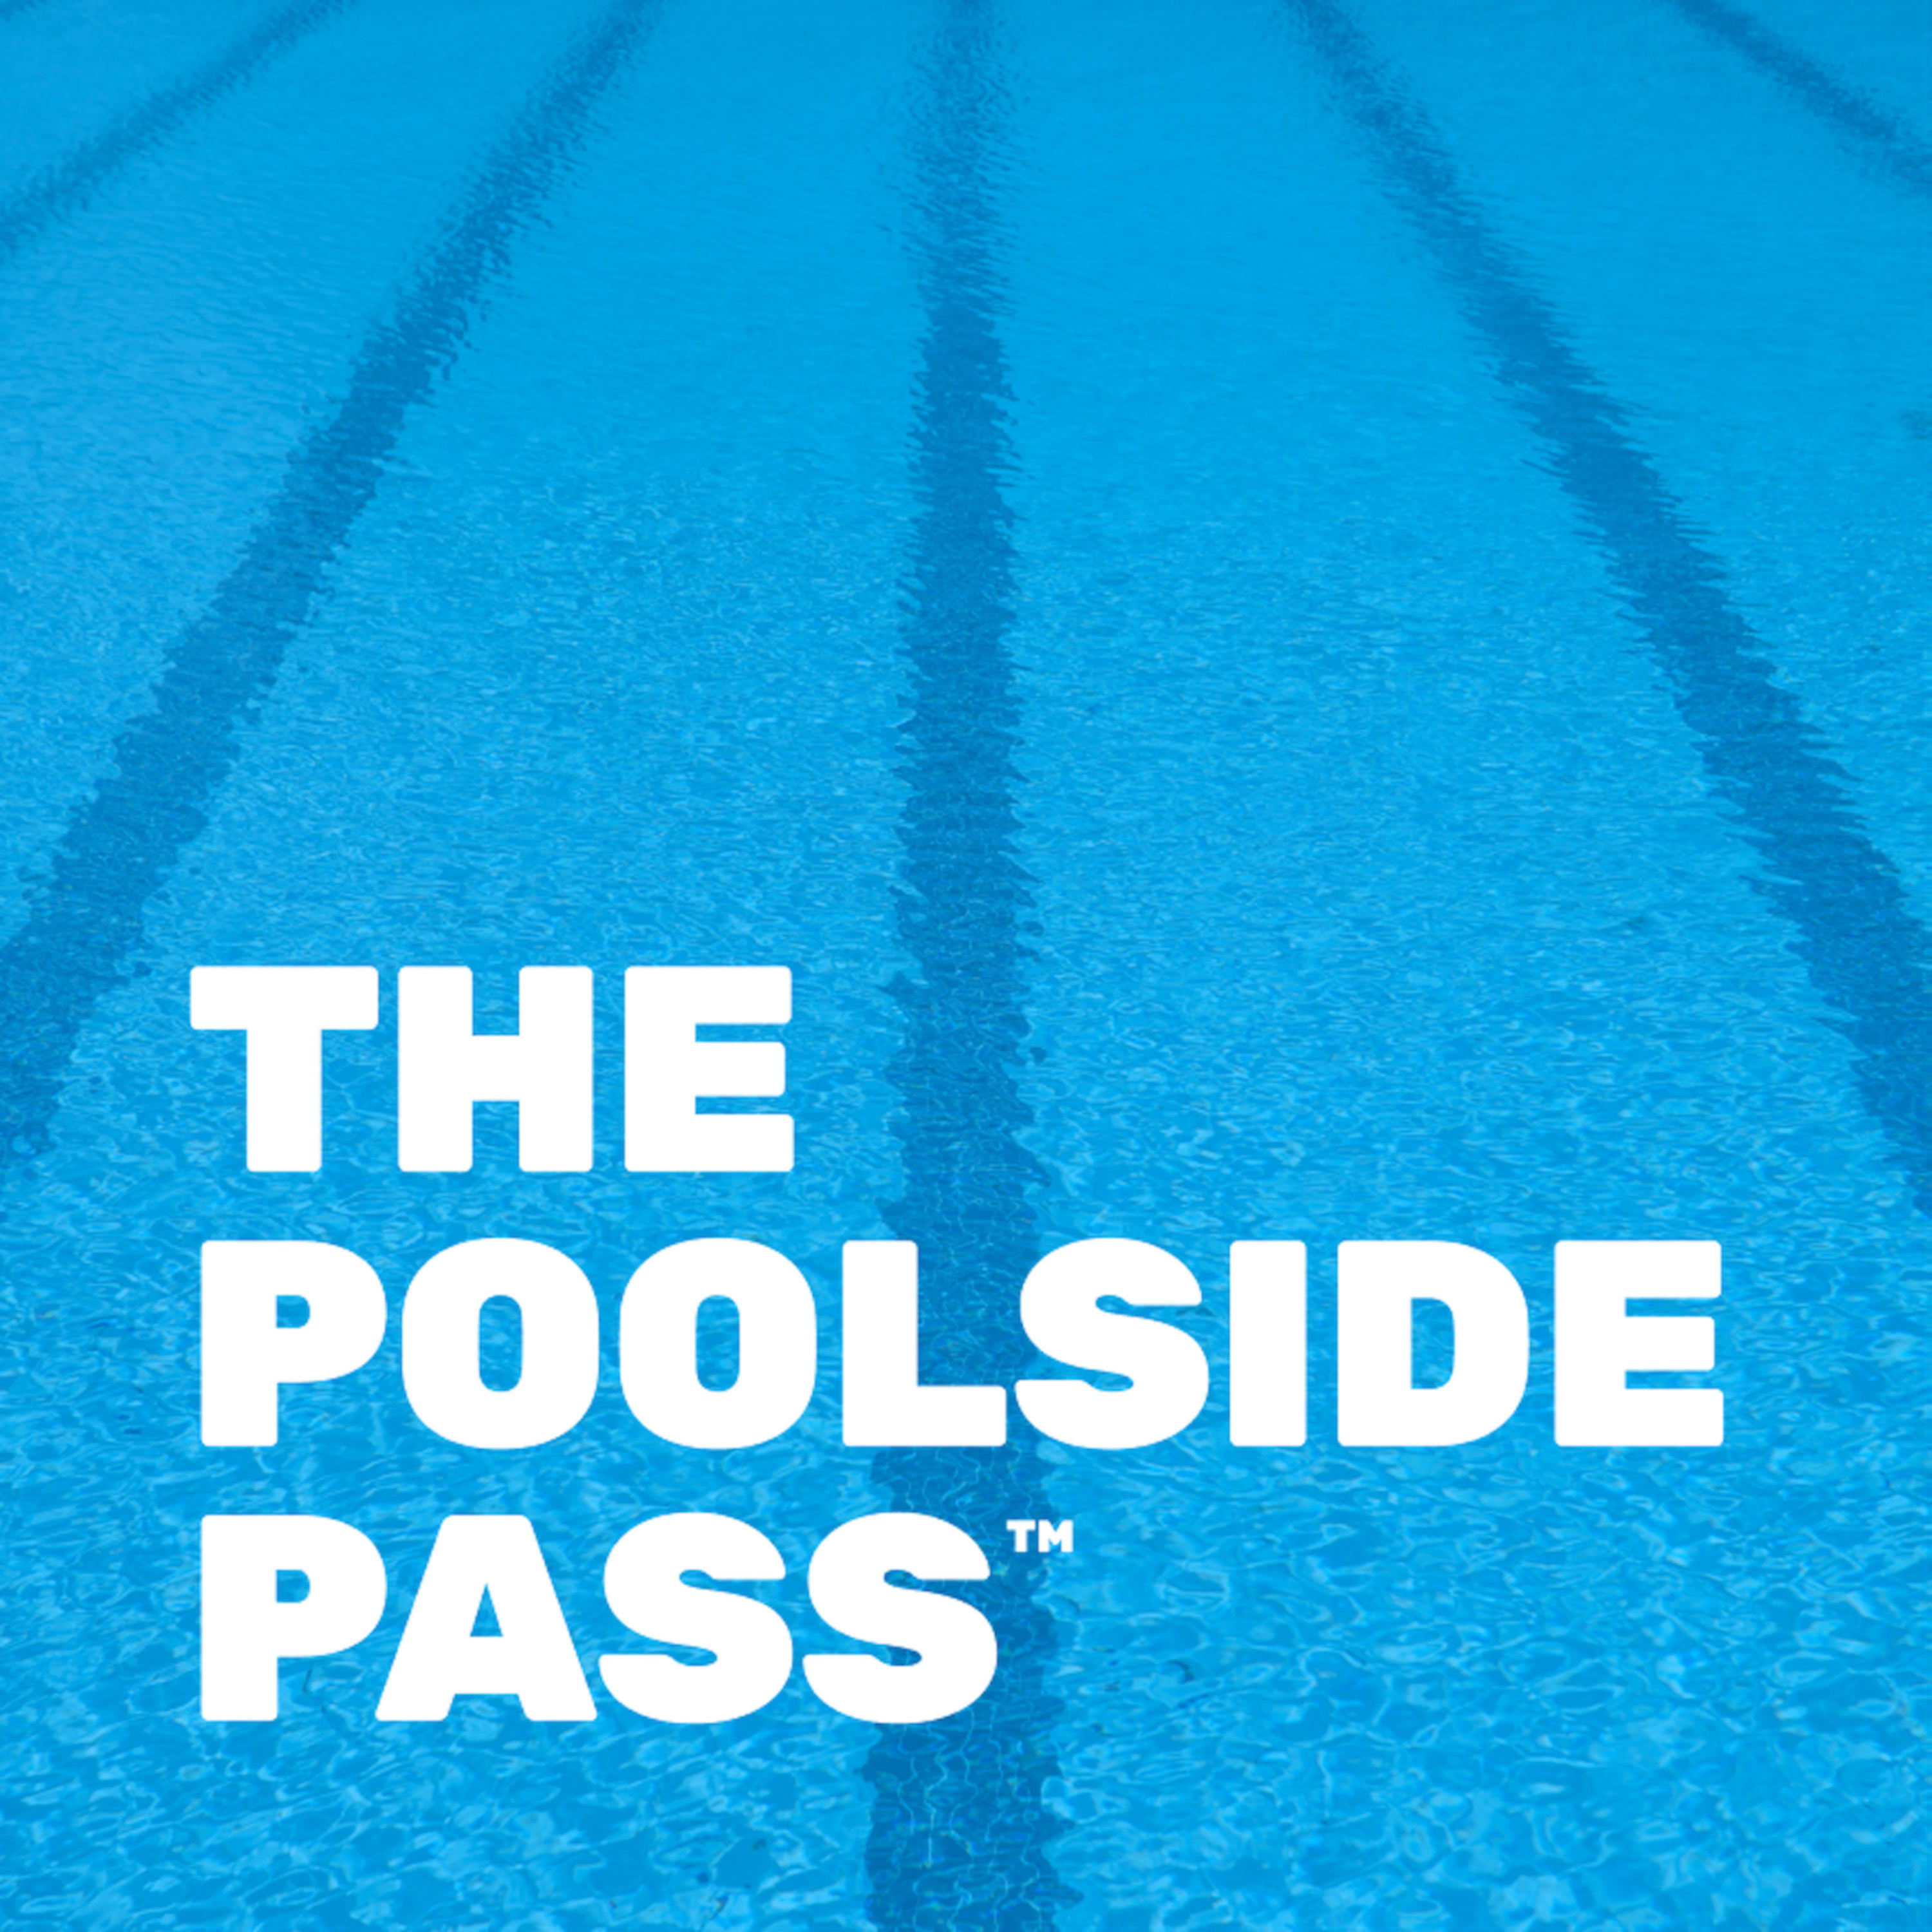 The Poolside Pass:The Poolside Pass